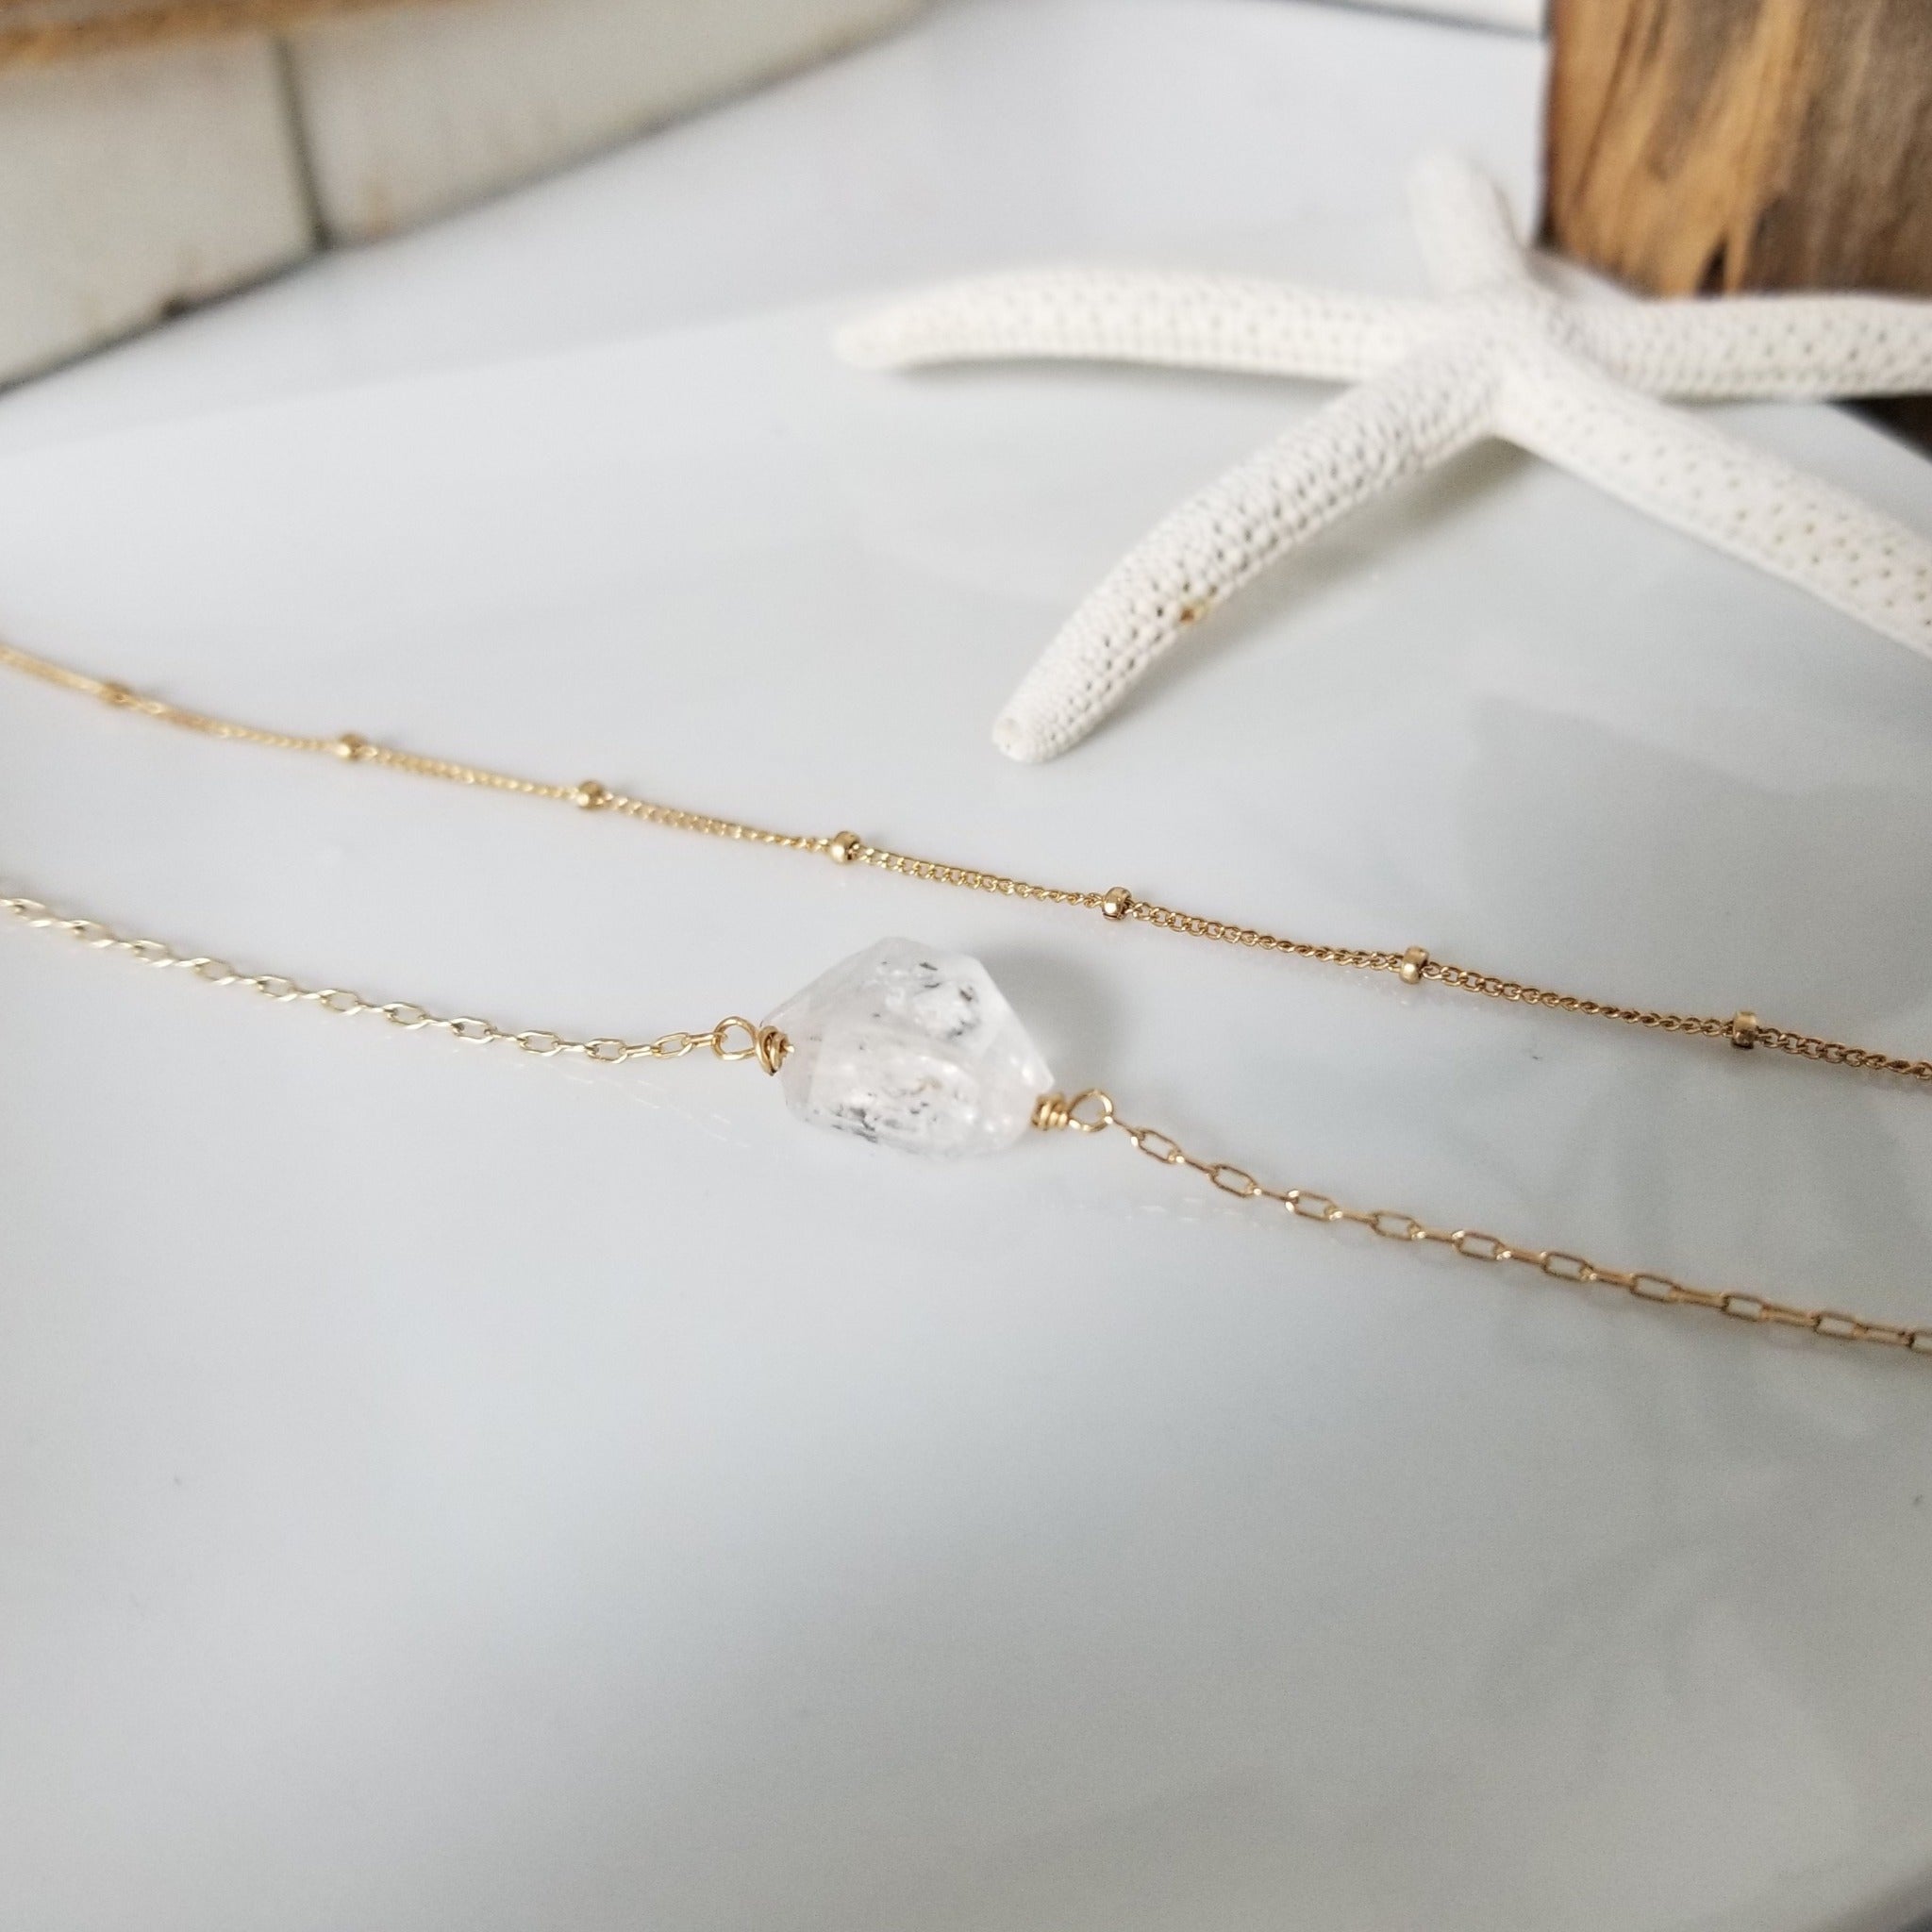 Freshwater Pearl or Herkimer Diamond Chain Link Bracelet - Sterling Silver, Gold, or Rose Gold